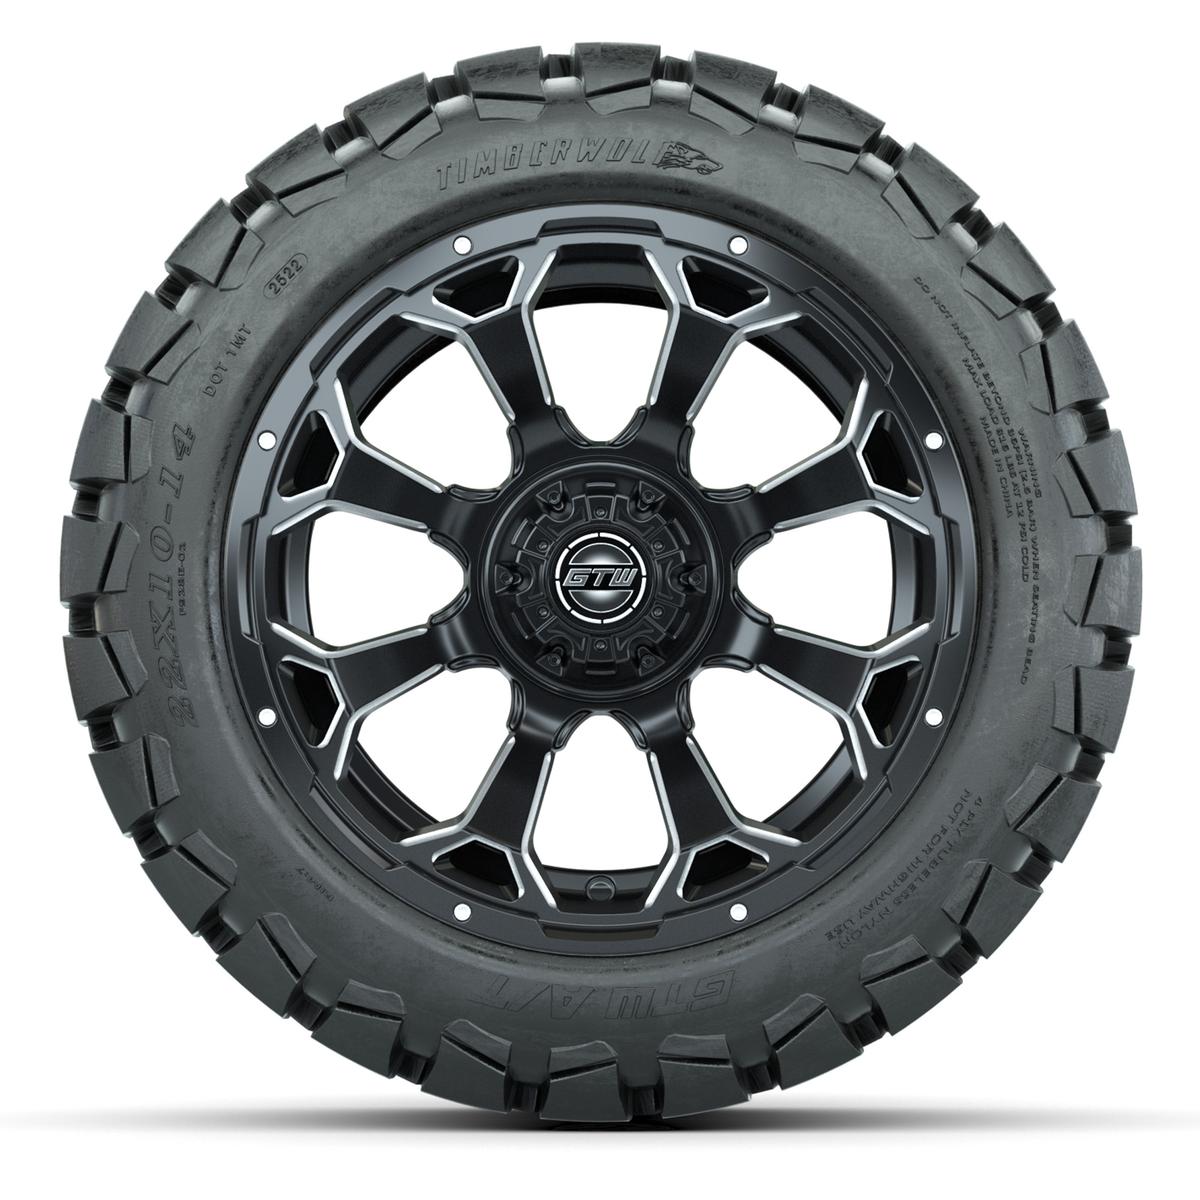 Set of (4) 14 in GTW Raven Wheels with 22x10-14 GTW Timberwolf All-Terrain Tires